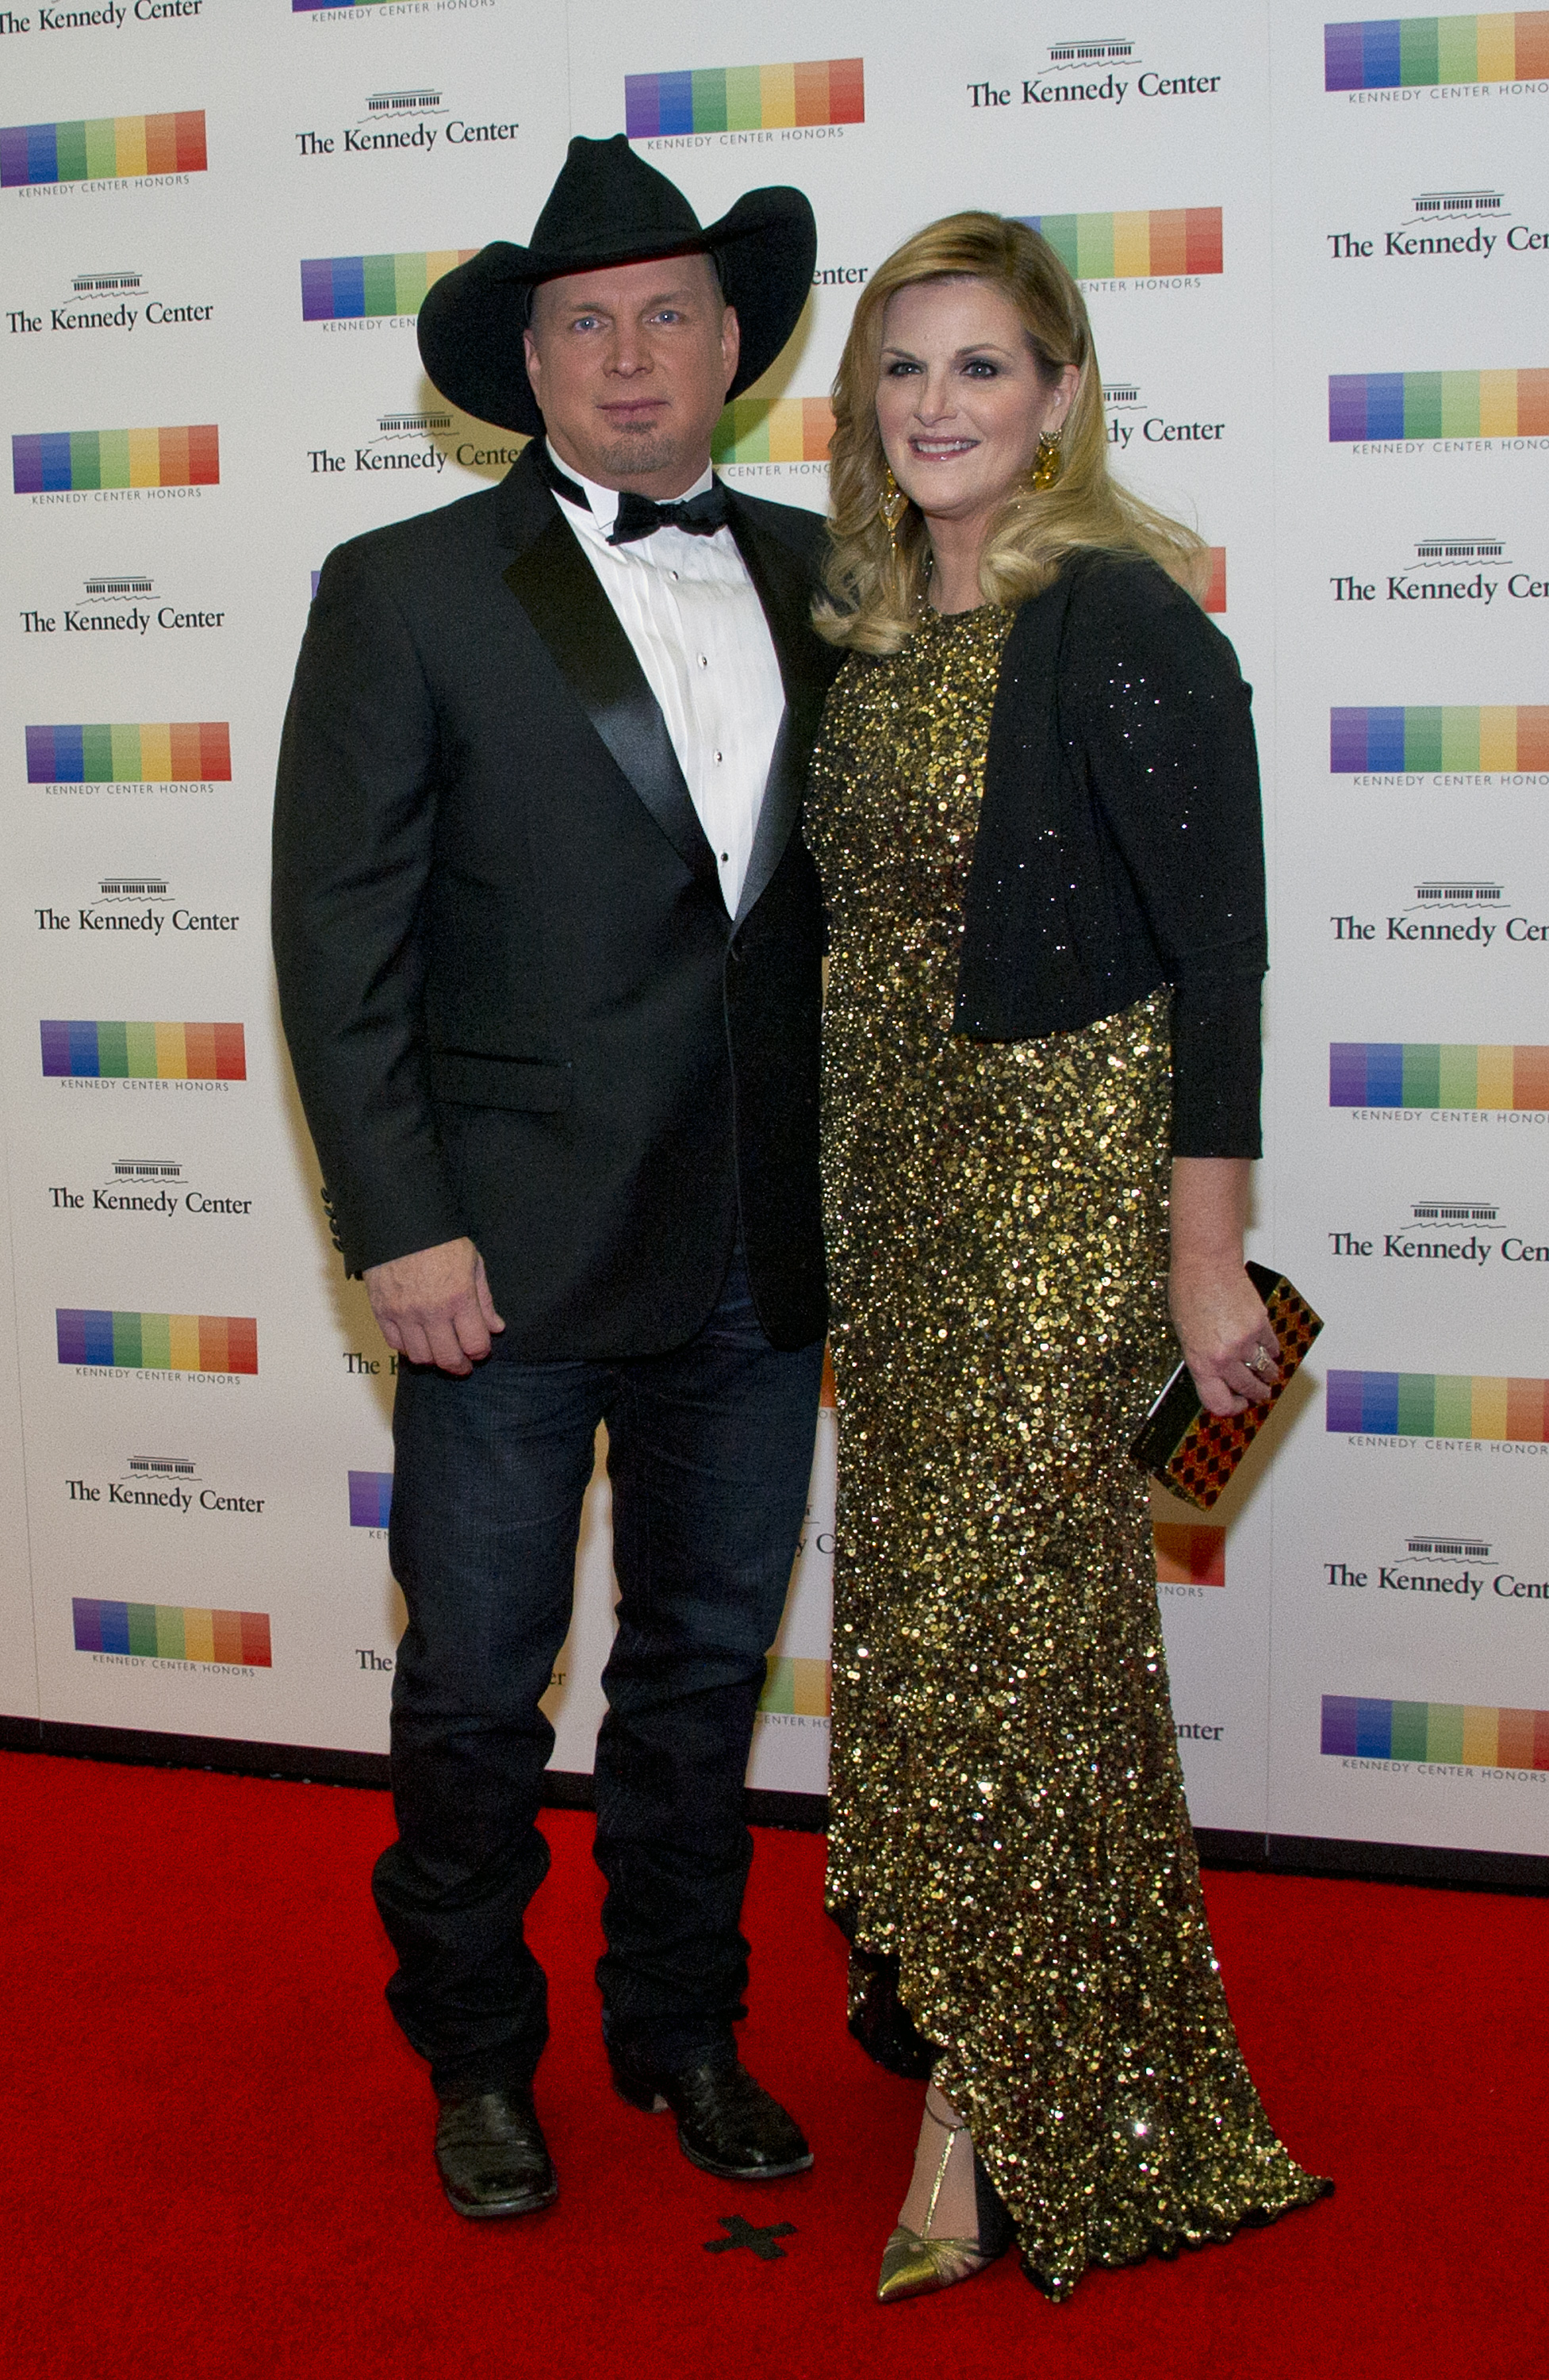 Garth Brooks and Tricia Yearwood arrive for the formal Artist's Dinner honoring the recipients of the 39th Annual Kennedy Center Honors at the U.S. Department of State in Washington, D.C., on December 3, 2016. | Source: Getty Images